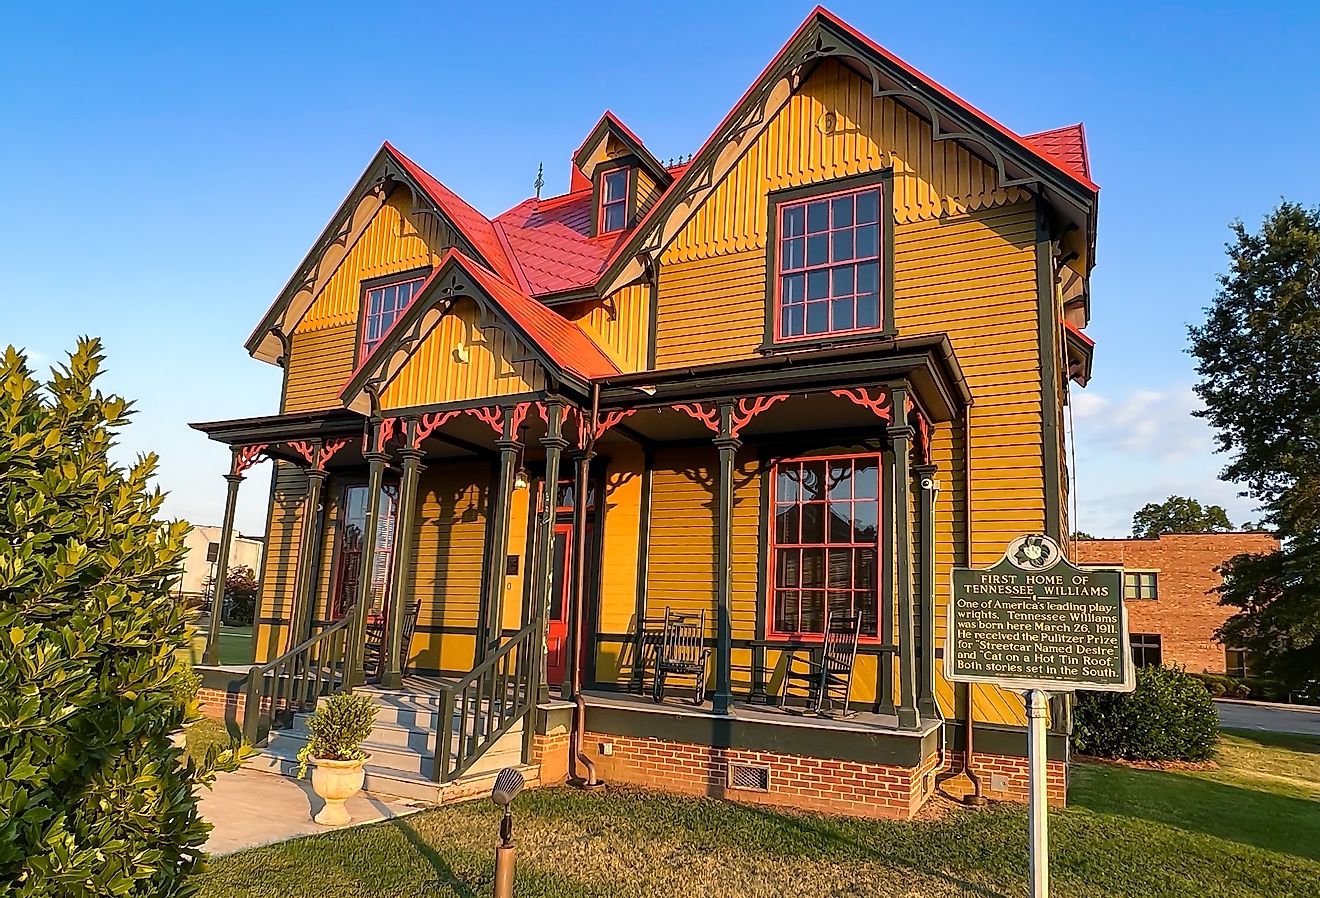 Birthplace of American playwright and screenwriter Tennessee Williams, in Columbus, Mississippi. Image credit Chad Robertson Media via Shutterstock